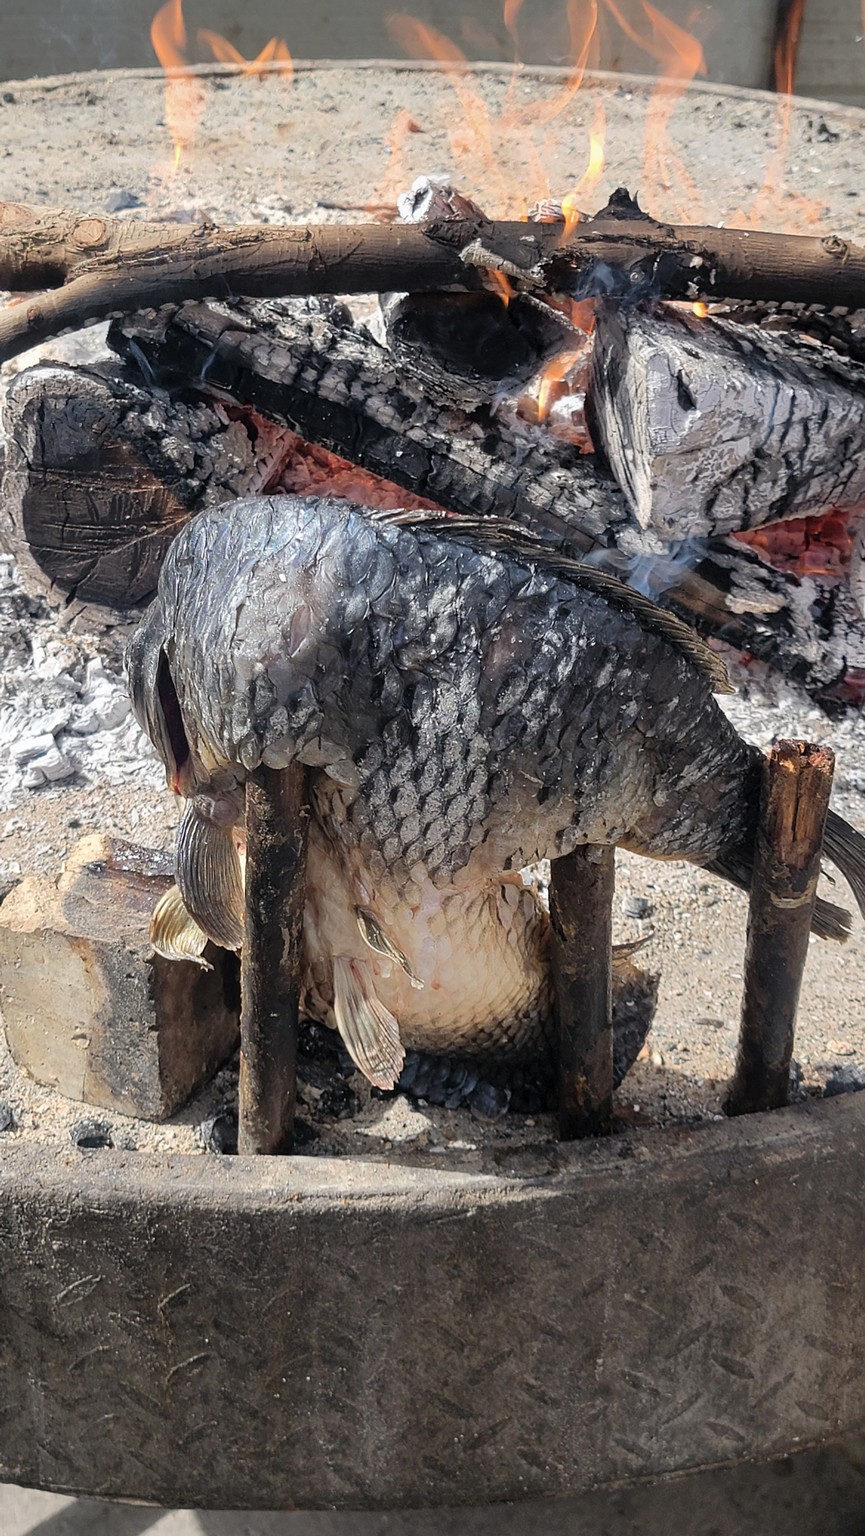 a fish on a stick over a fire